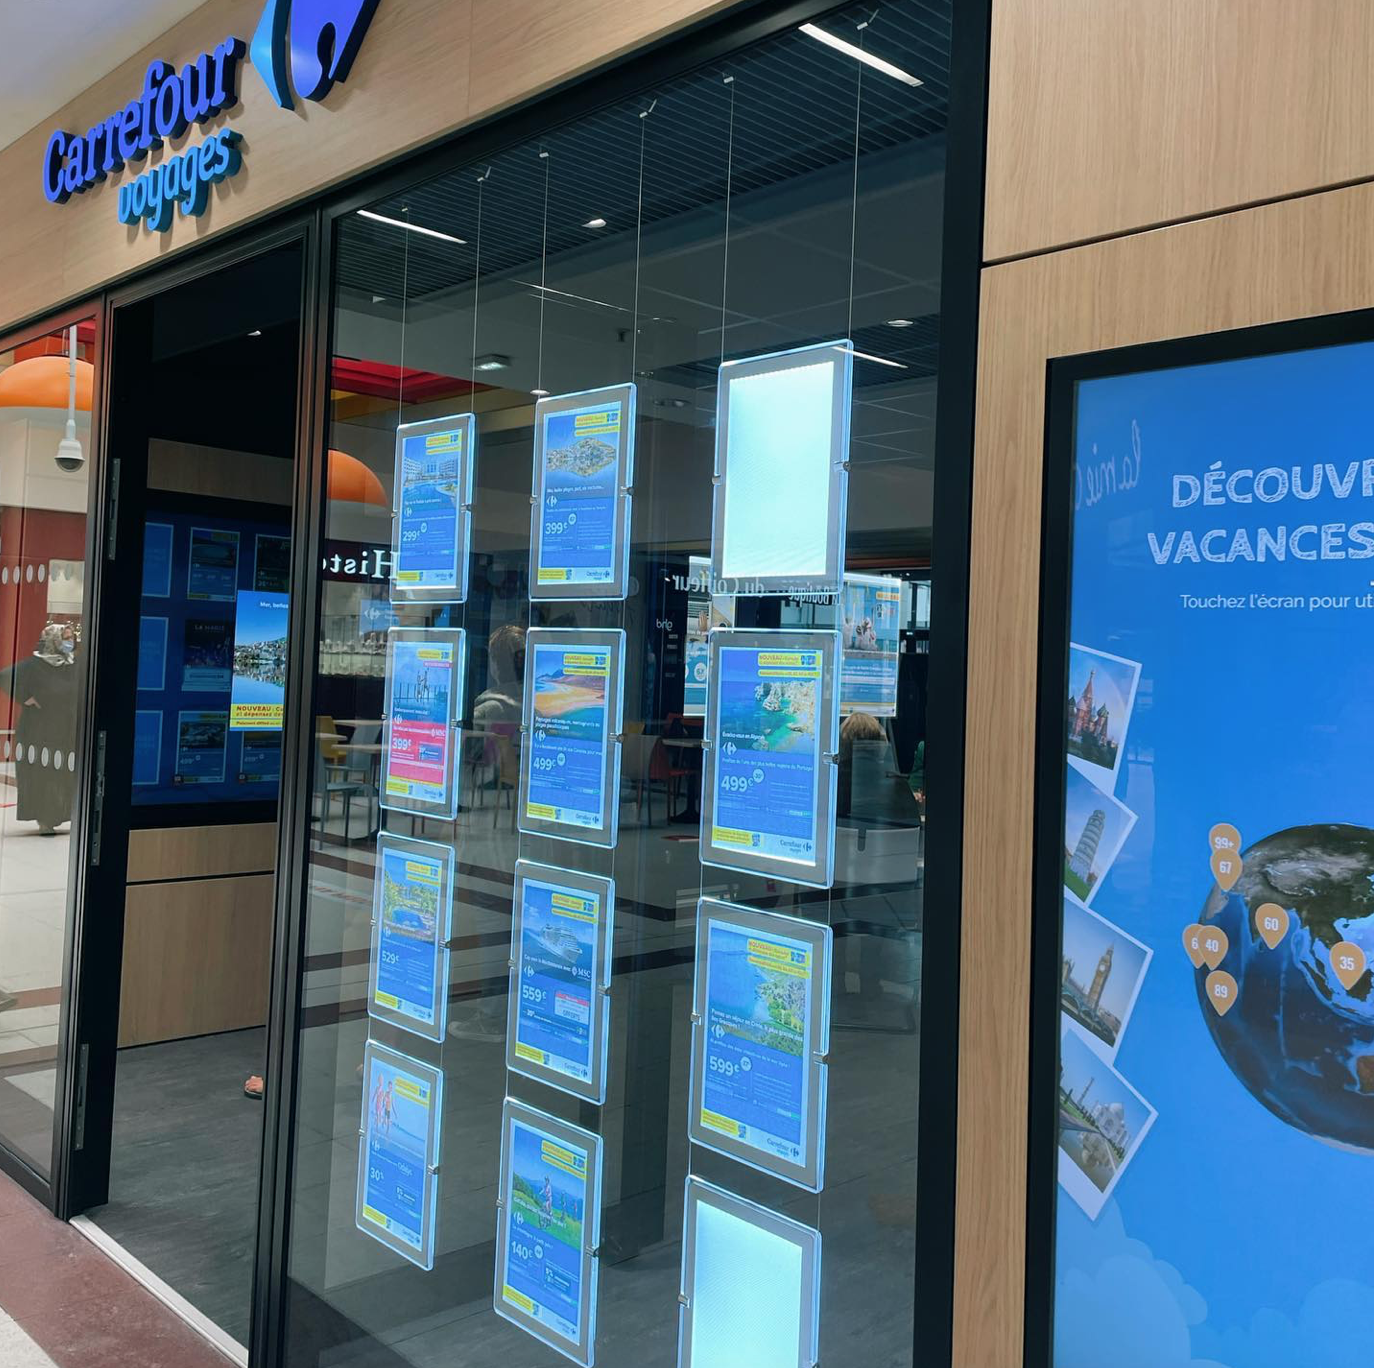 carrefour voyage angers